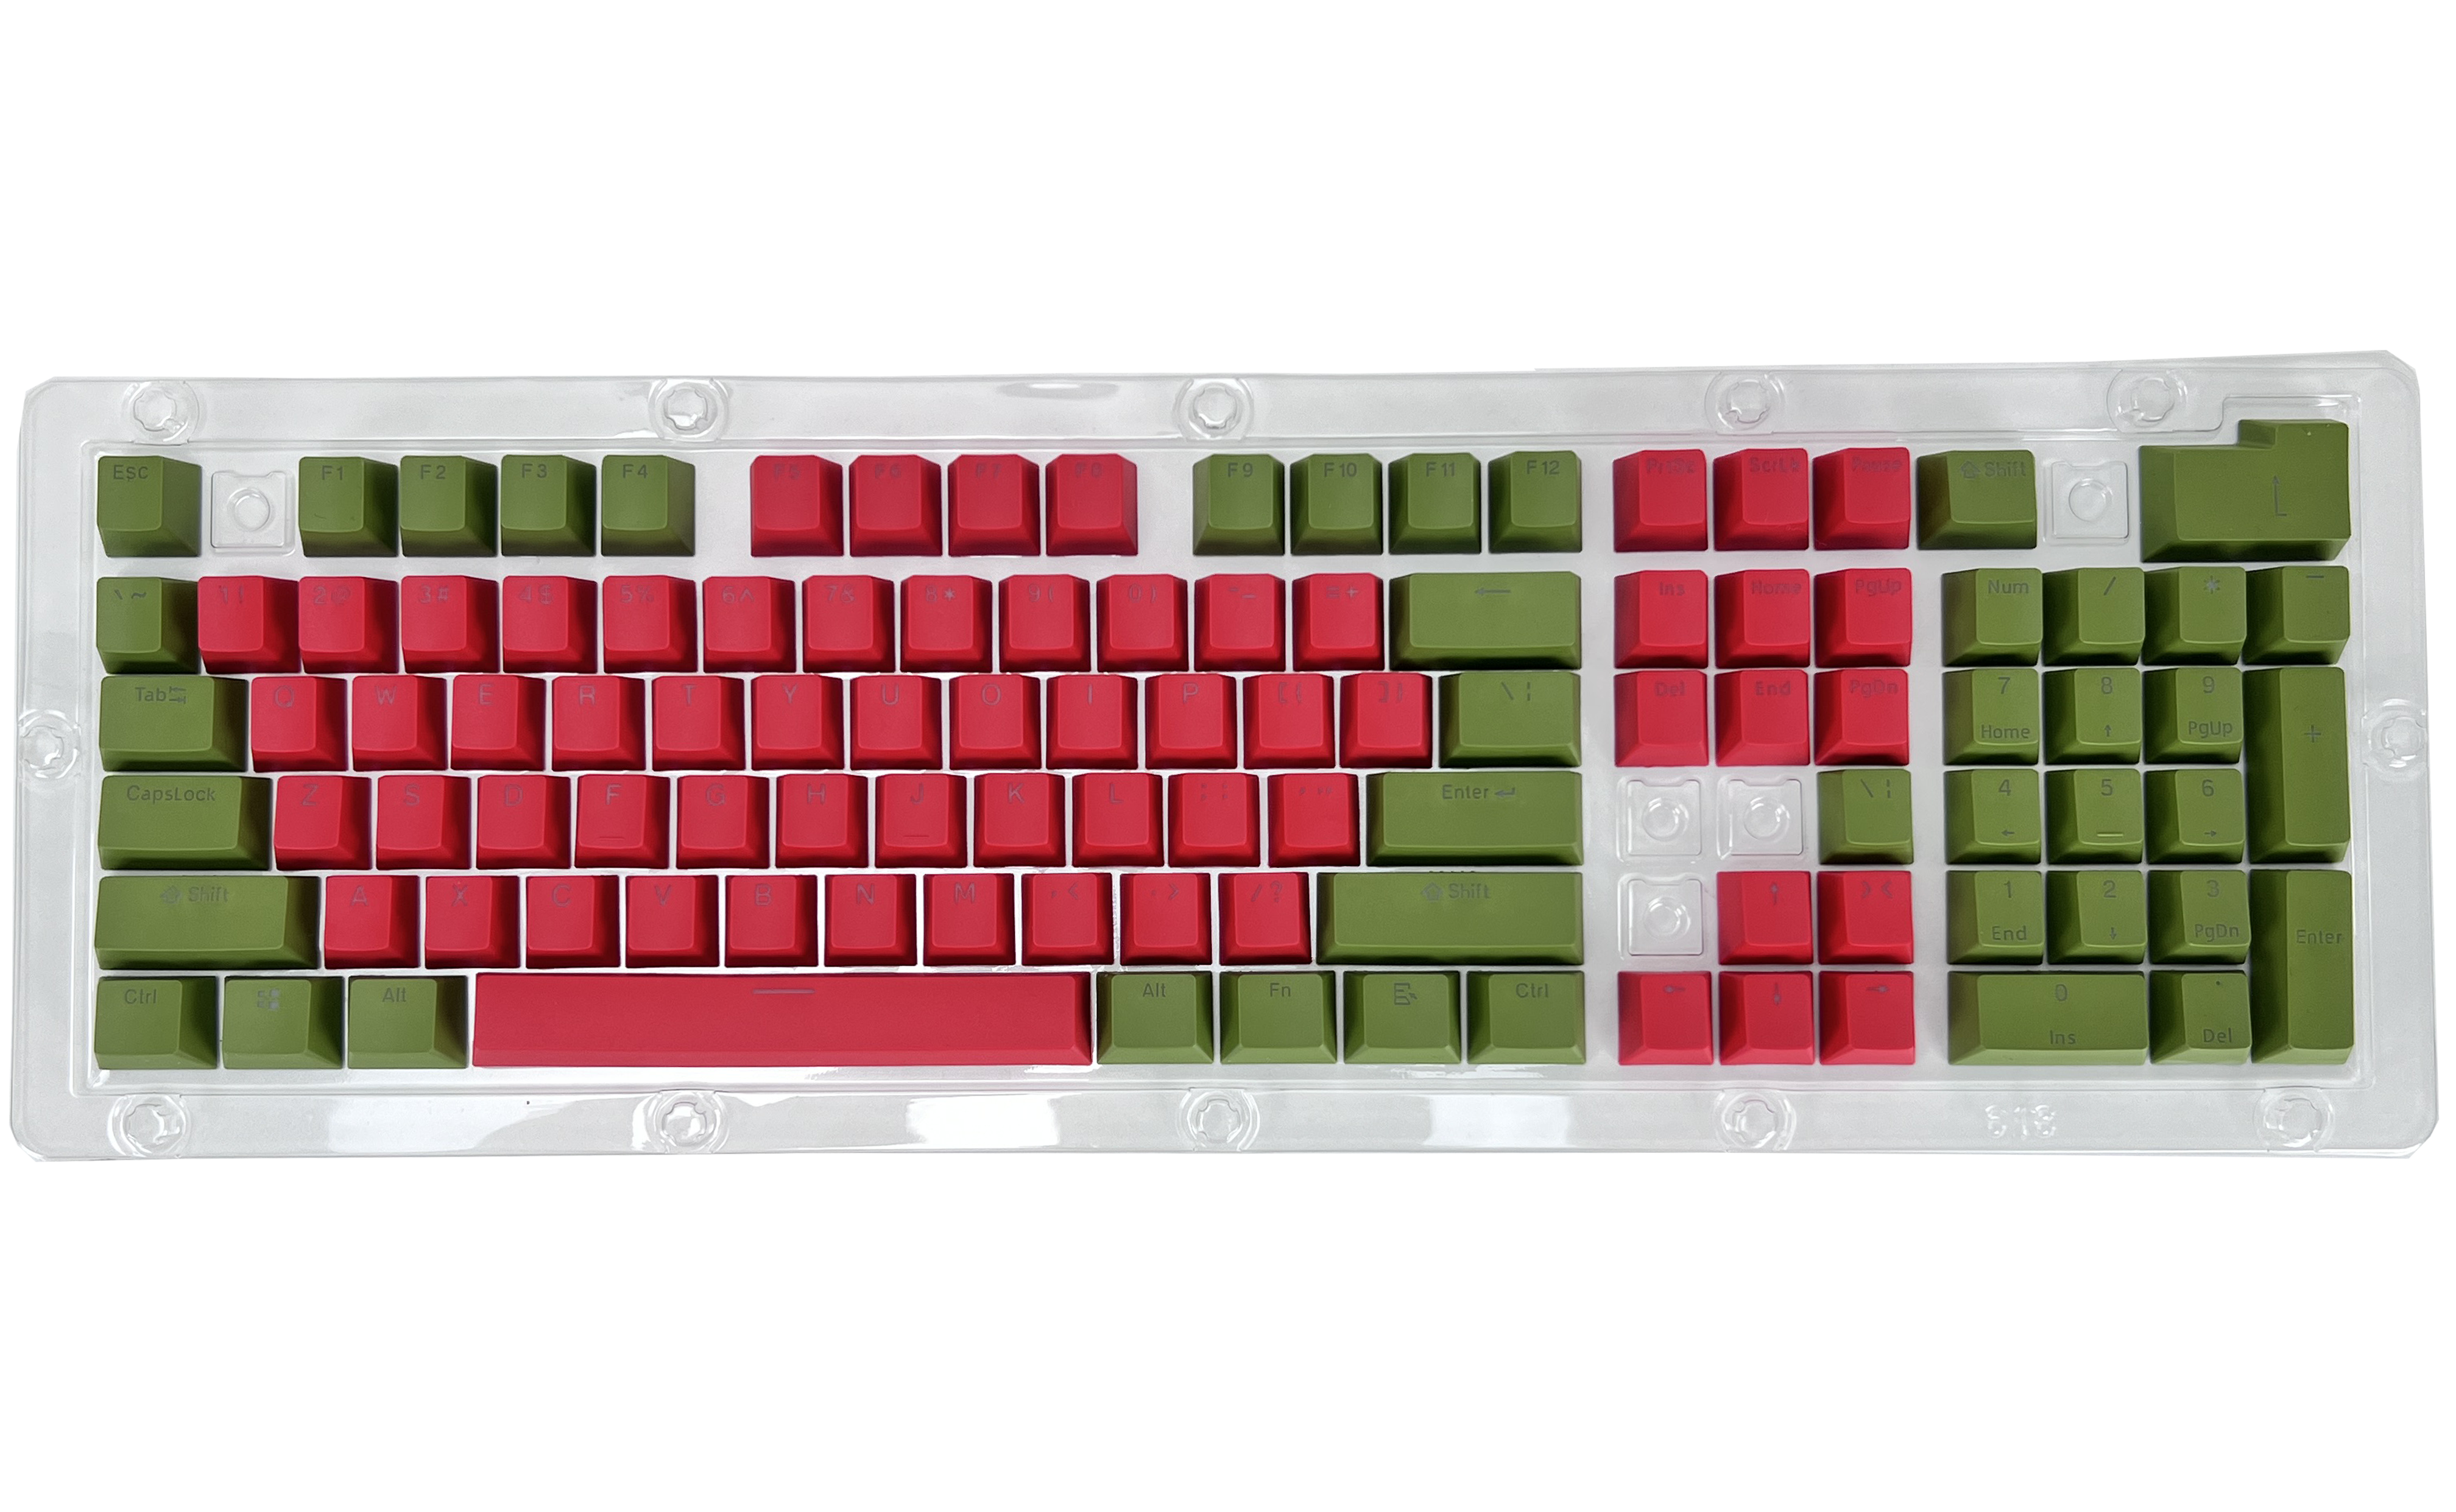 Red & Green PBT Keycaps